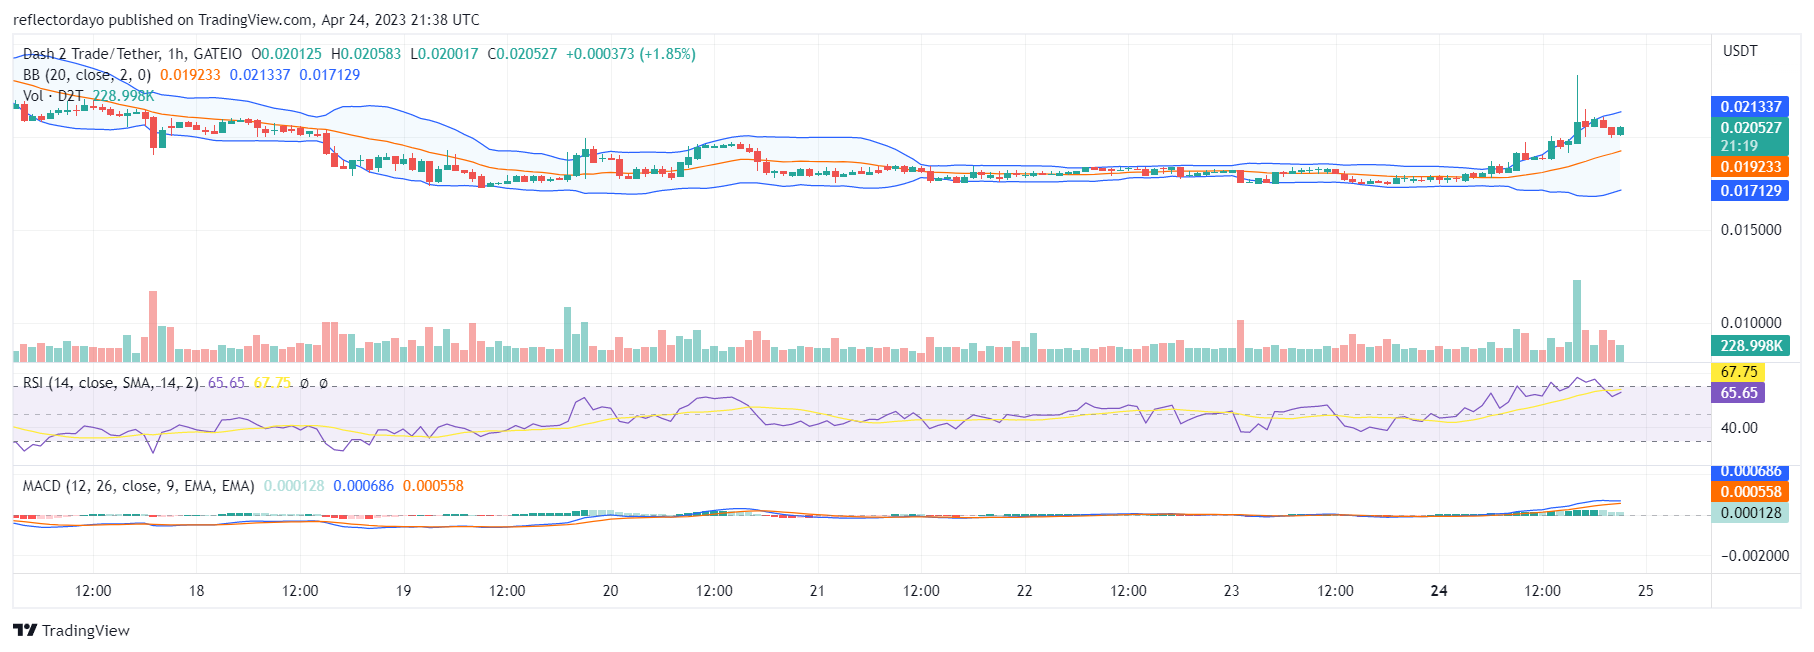 Dash 2 Trade (D2T) Is on the Rise Again